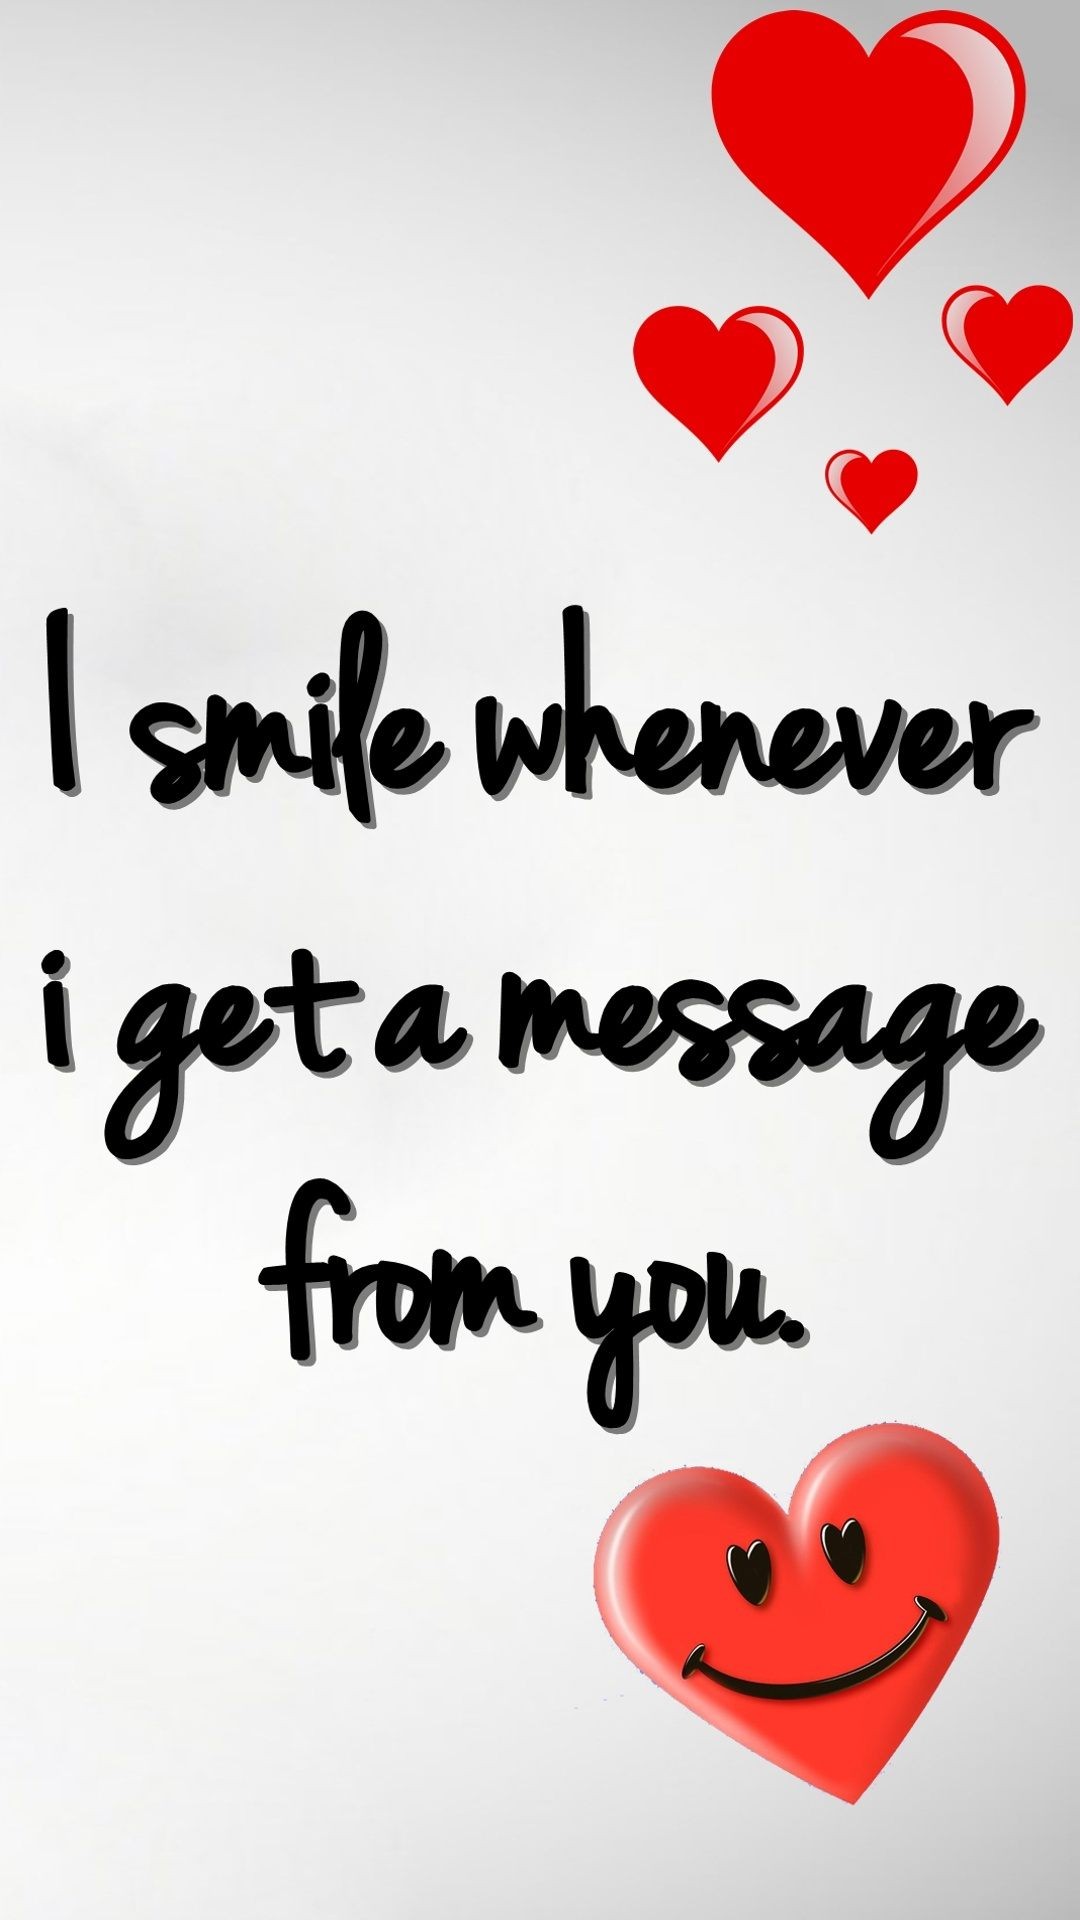 Smile Love Message Android wallpaper - Android HD wallpapers